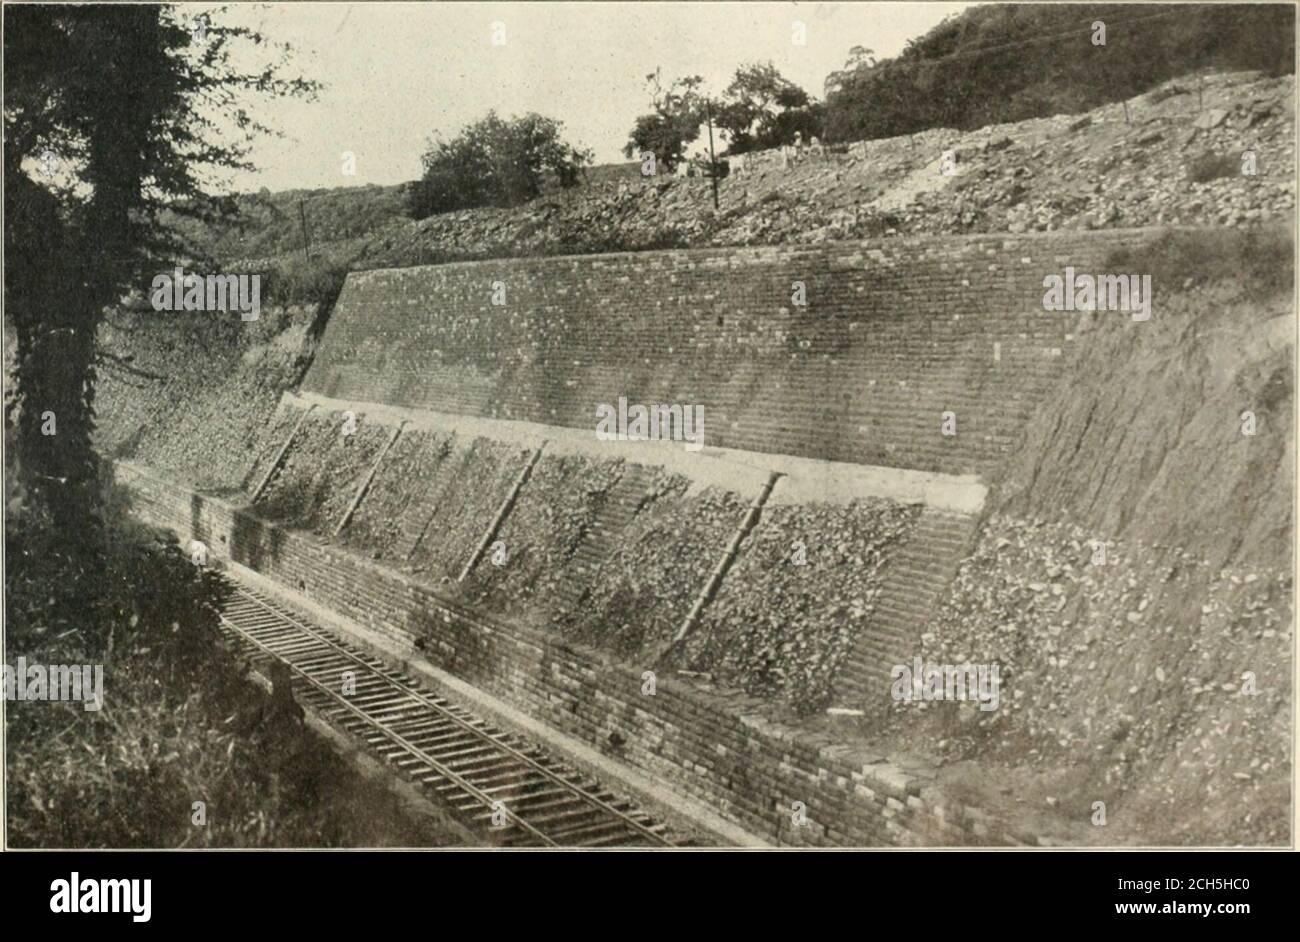 . Railway age . Retaining Walls and Road Bed.. Revetment Wall and Drains in Durrah Hill Cut; Nagda-Muttra State Railway. 678 tHE RAILROAD GAZETTE. Vol XLIV, No. l6. below the ballast. Where the soil Is most treacherous, a confreteilraln has hci/i l)iillt h:ilf-w.iy up tlie slope to Interrupt the rain-fall. Above (111- (liain the soil Ik revetted with dry stone up to tha topor the slope. Uelow the drain are dry stone counterforts and earth-enware pipes carrying the rainfall Into the solid masonry drainsat foundation level. We are Indebted to Indian hUiginvi-iimj for I he photoRiaphsand the deta Stock Photo